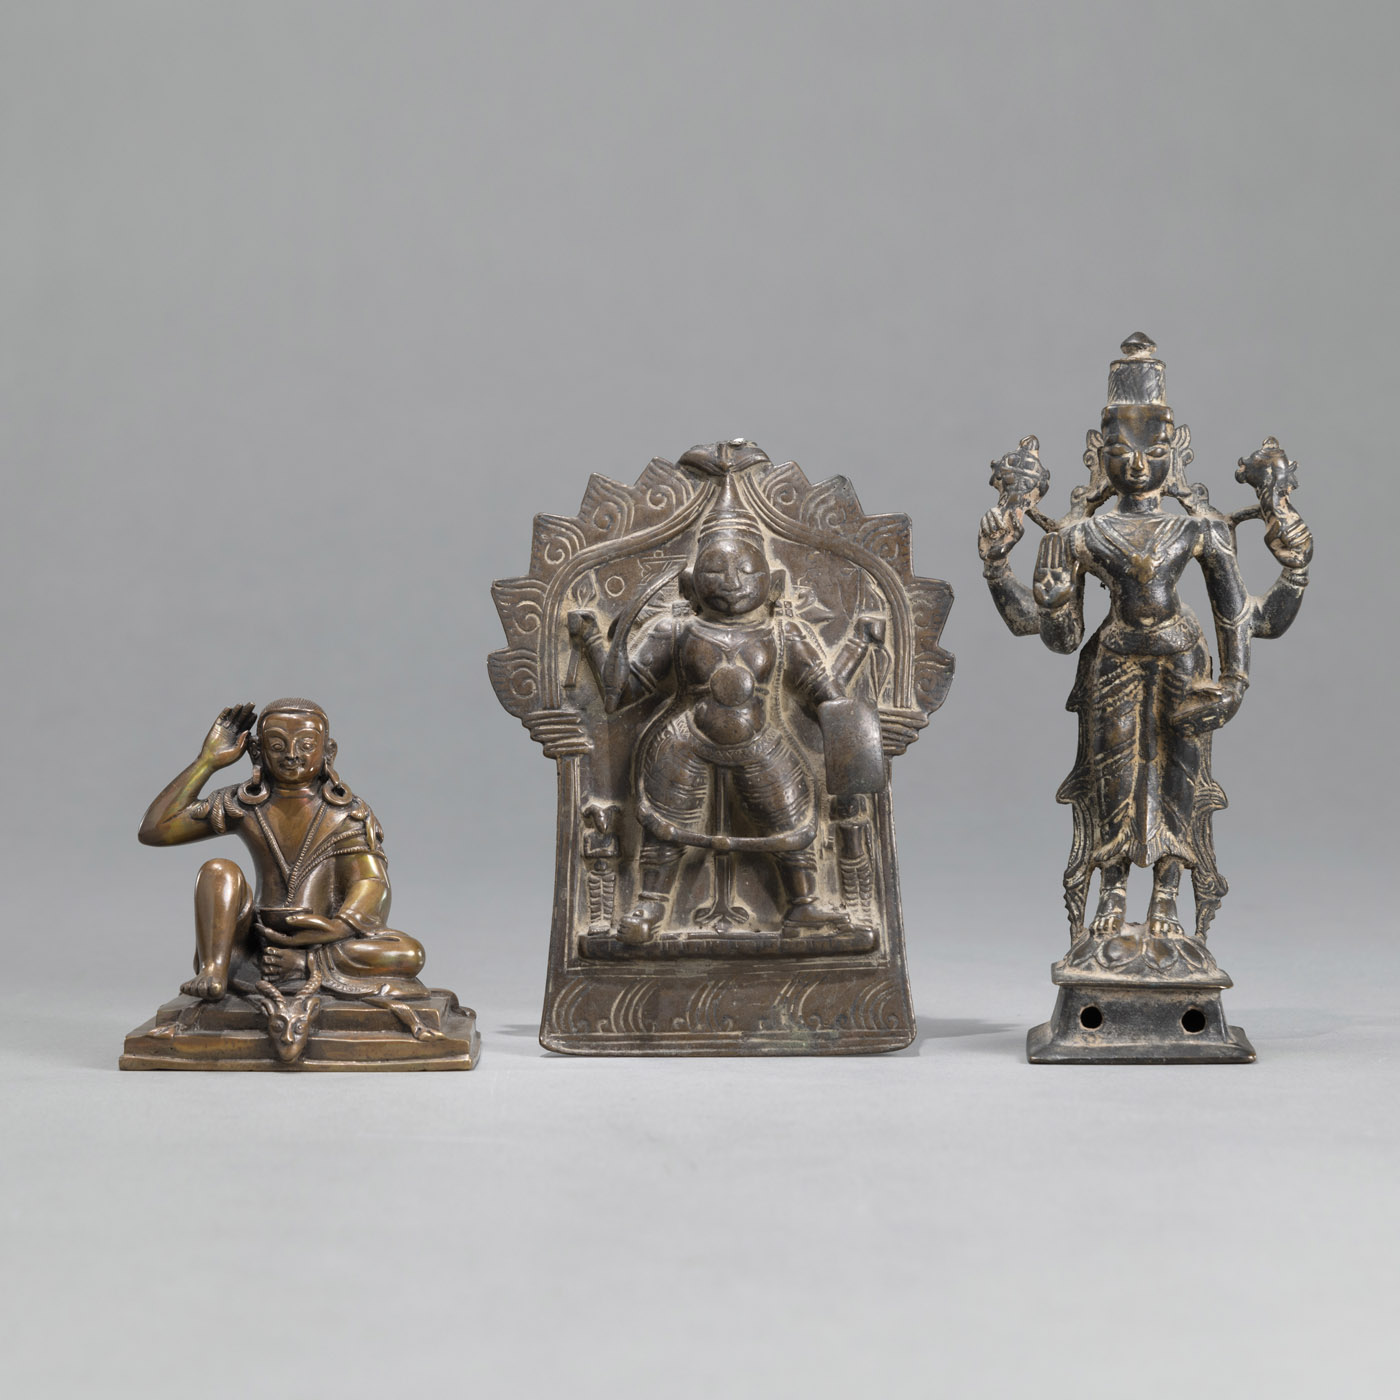 <b>A GROUP OF BRONZES, INCLUDING A FIGURE OF MILAREPA</b>